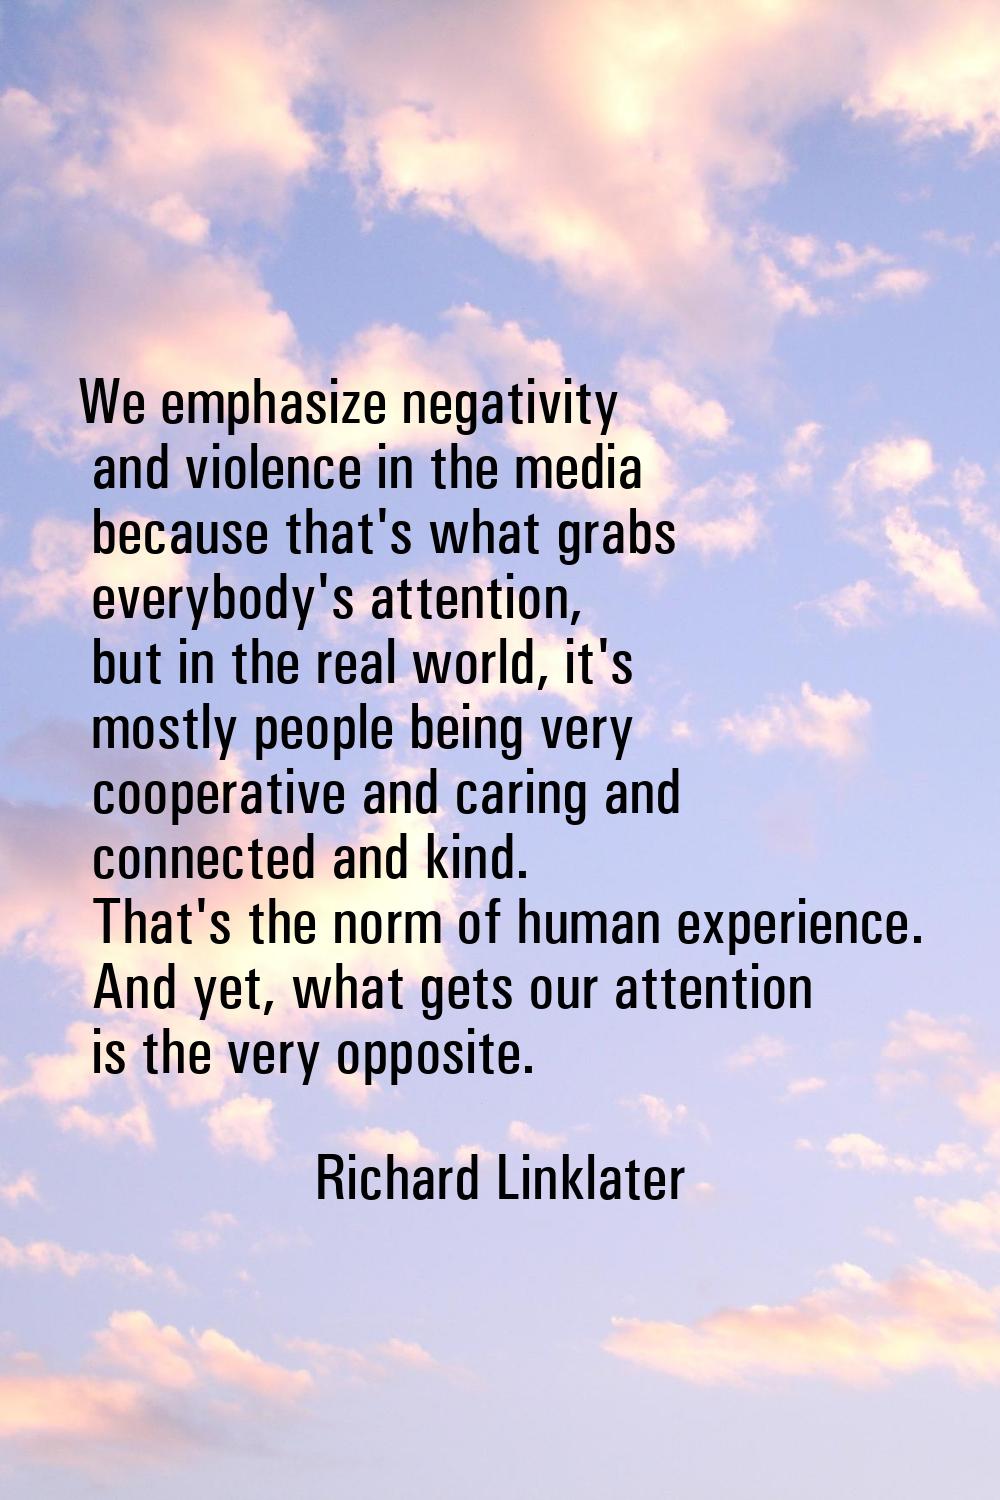 We emphasize negativity and violence in the media because that's what grabs everybody's attention, 